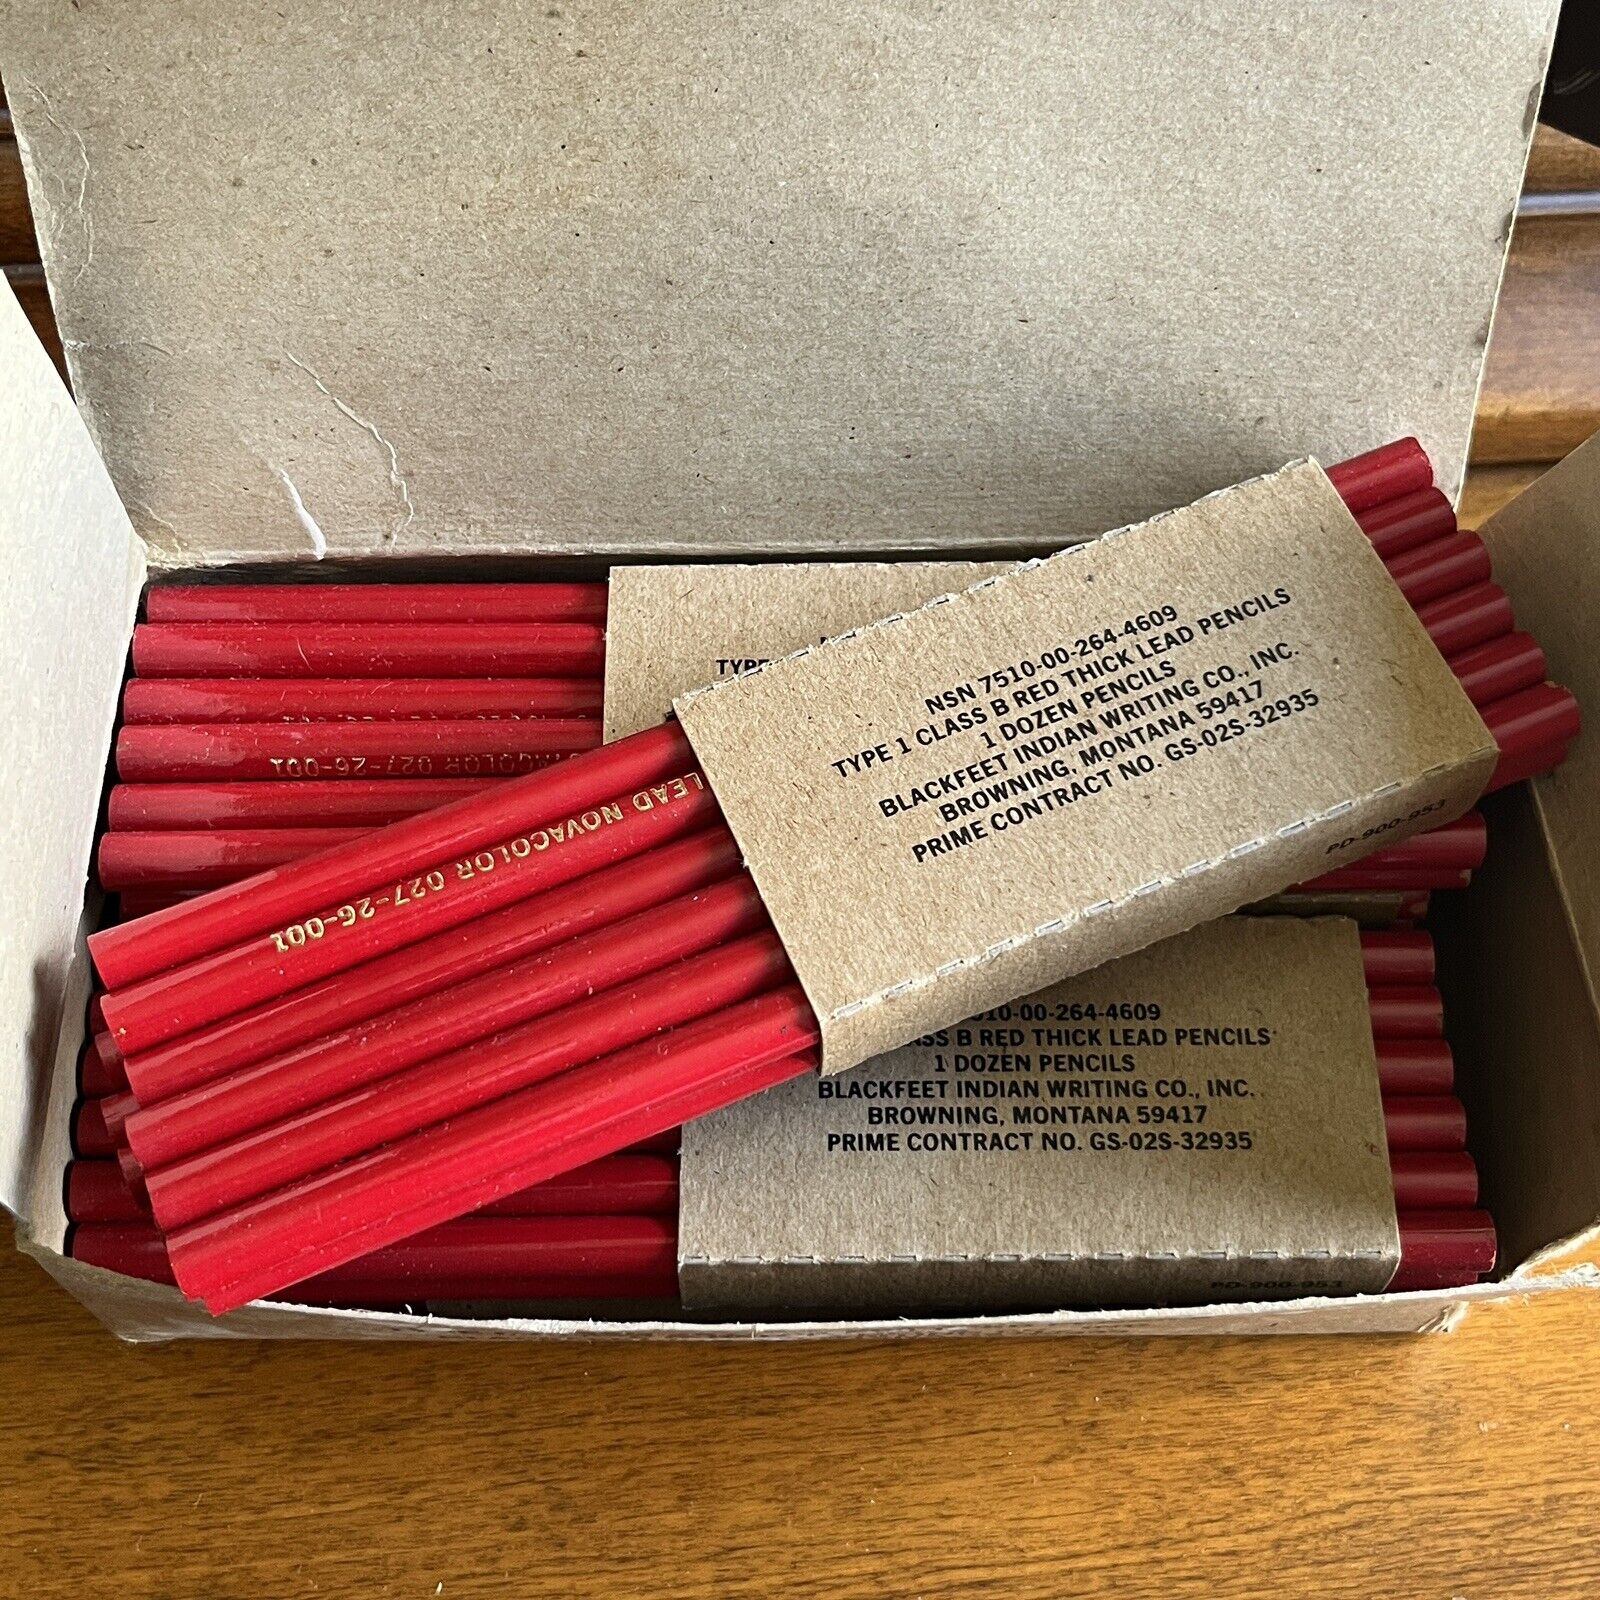 72 Vintage Blackfeet Indian Writing Pencil Lot -6 Full Boxes Of 12-Red Novacolor